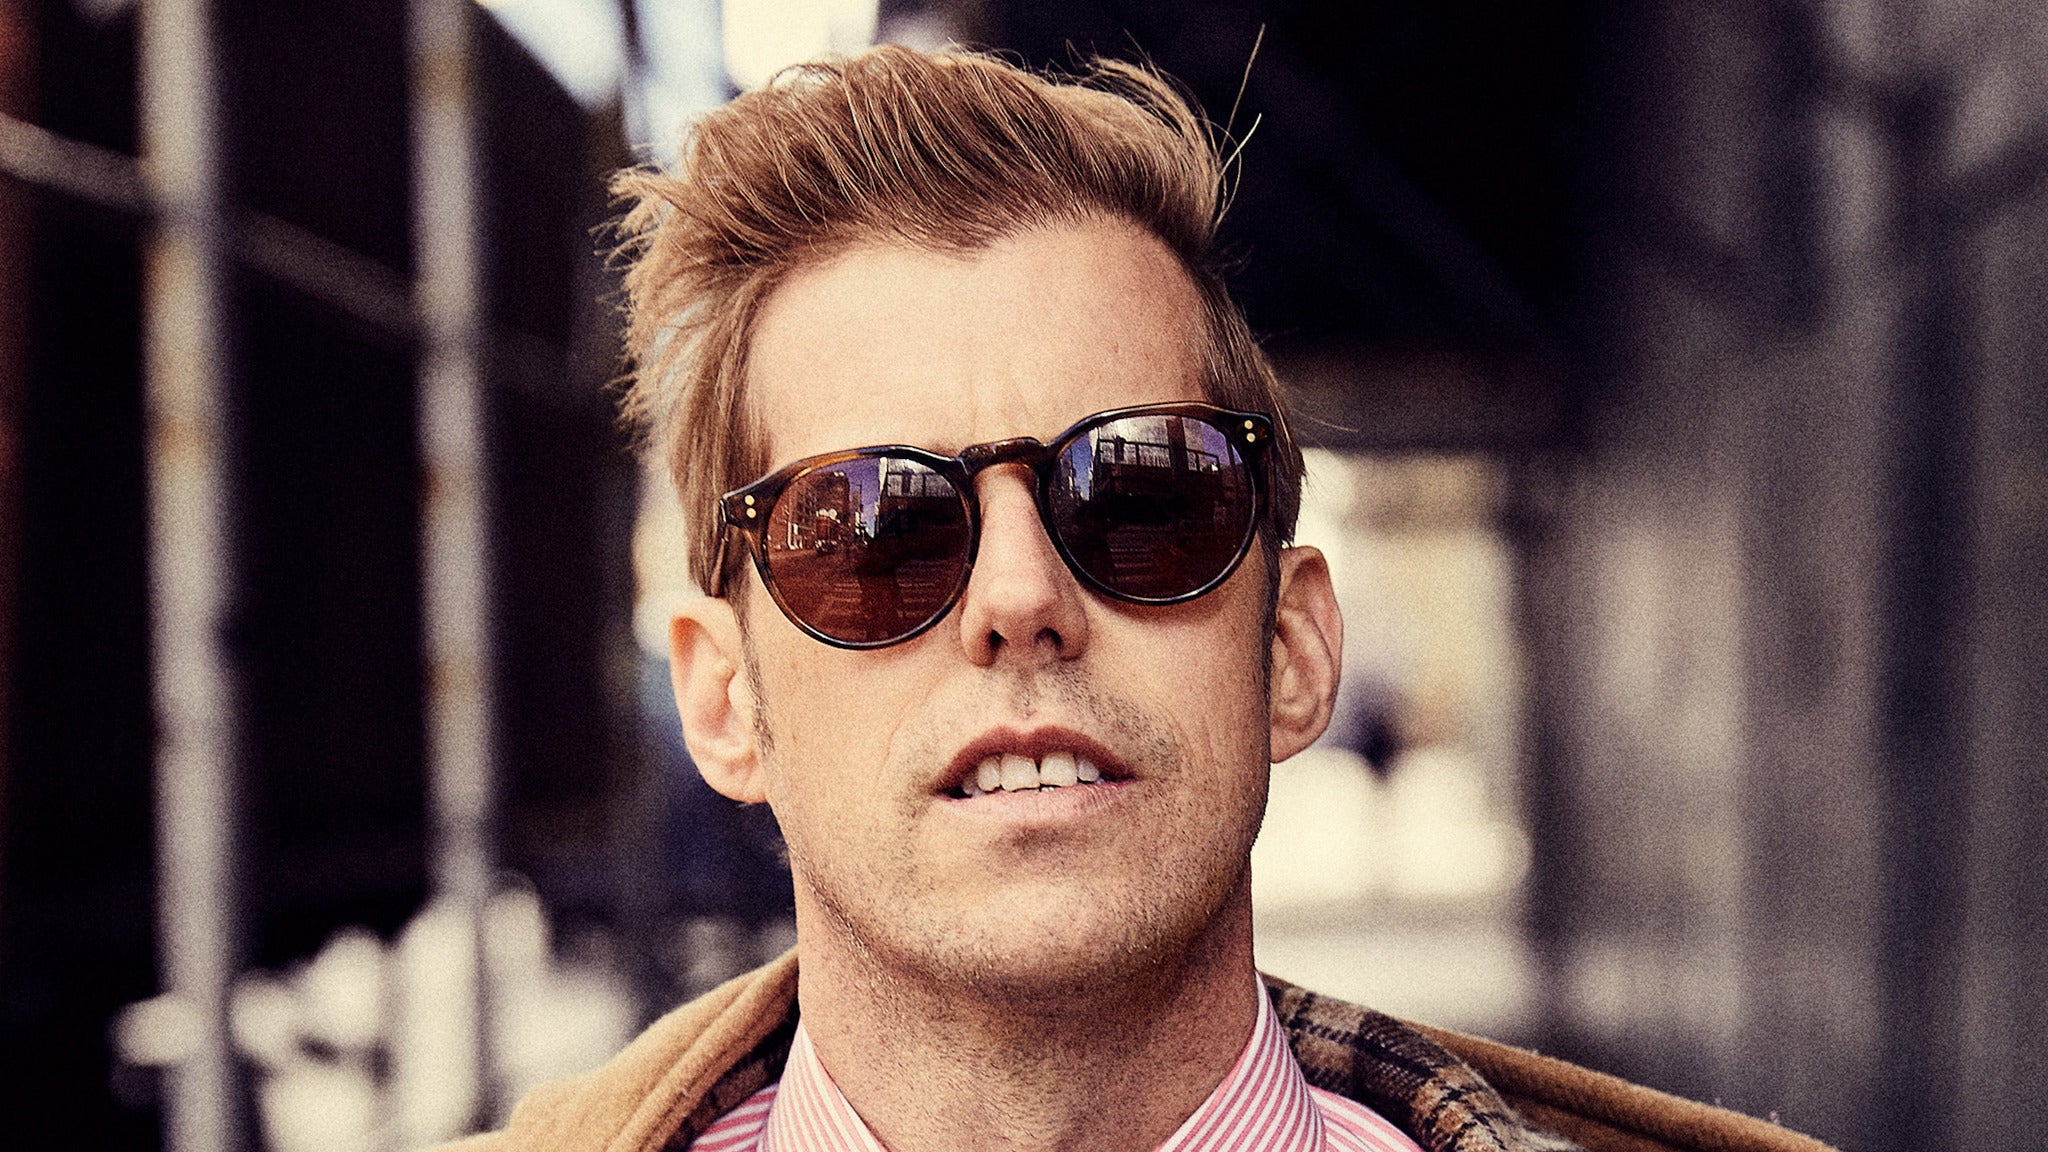 Andrew McMahon in the Wilderness in Seattle promo photo for Artist / Local presale offer code